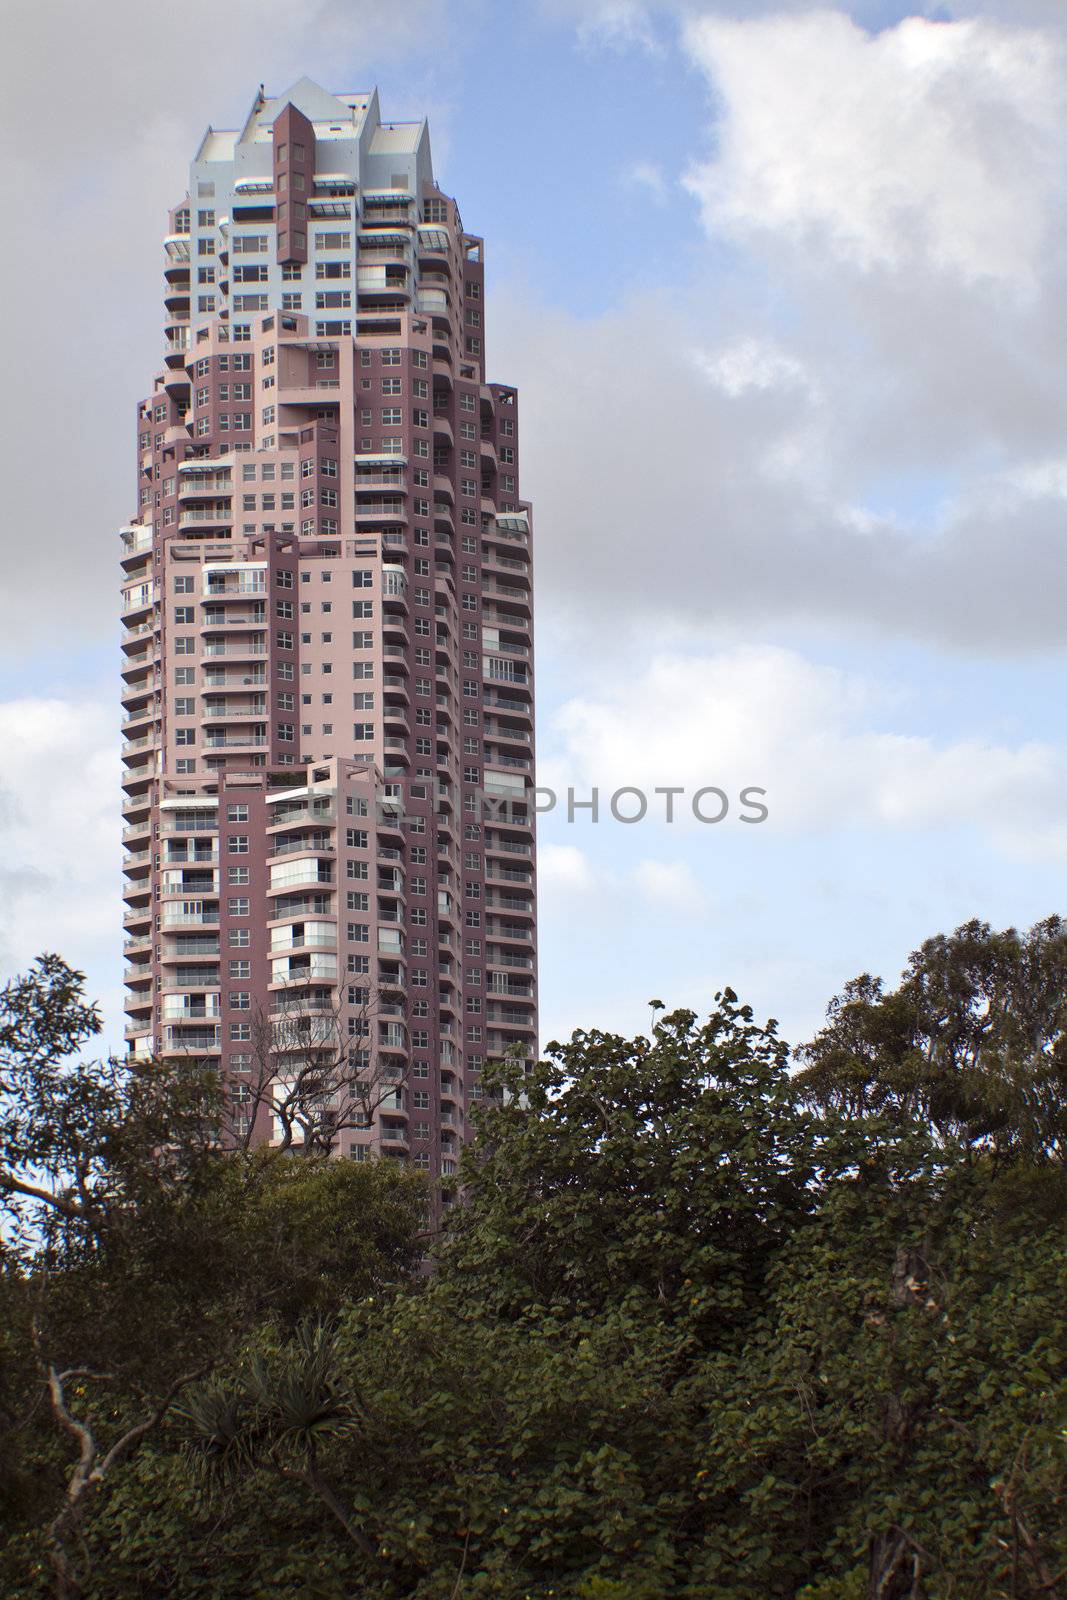 Tall pink apartment building in Australia